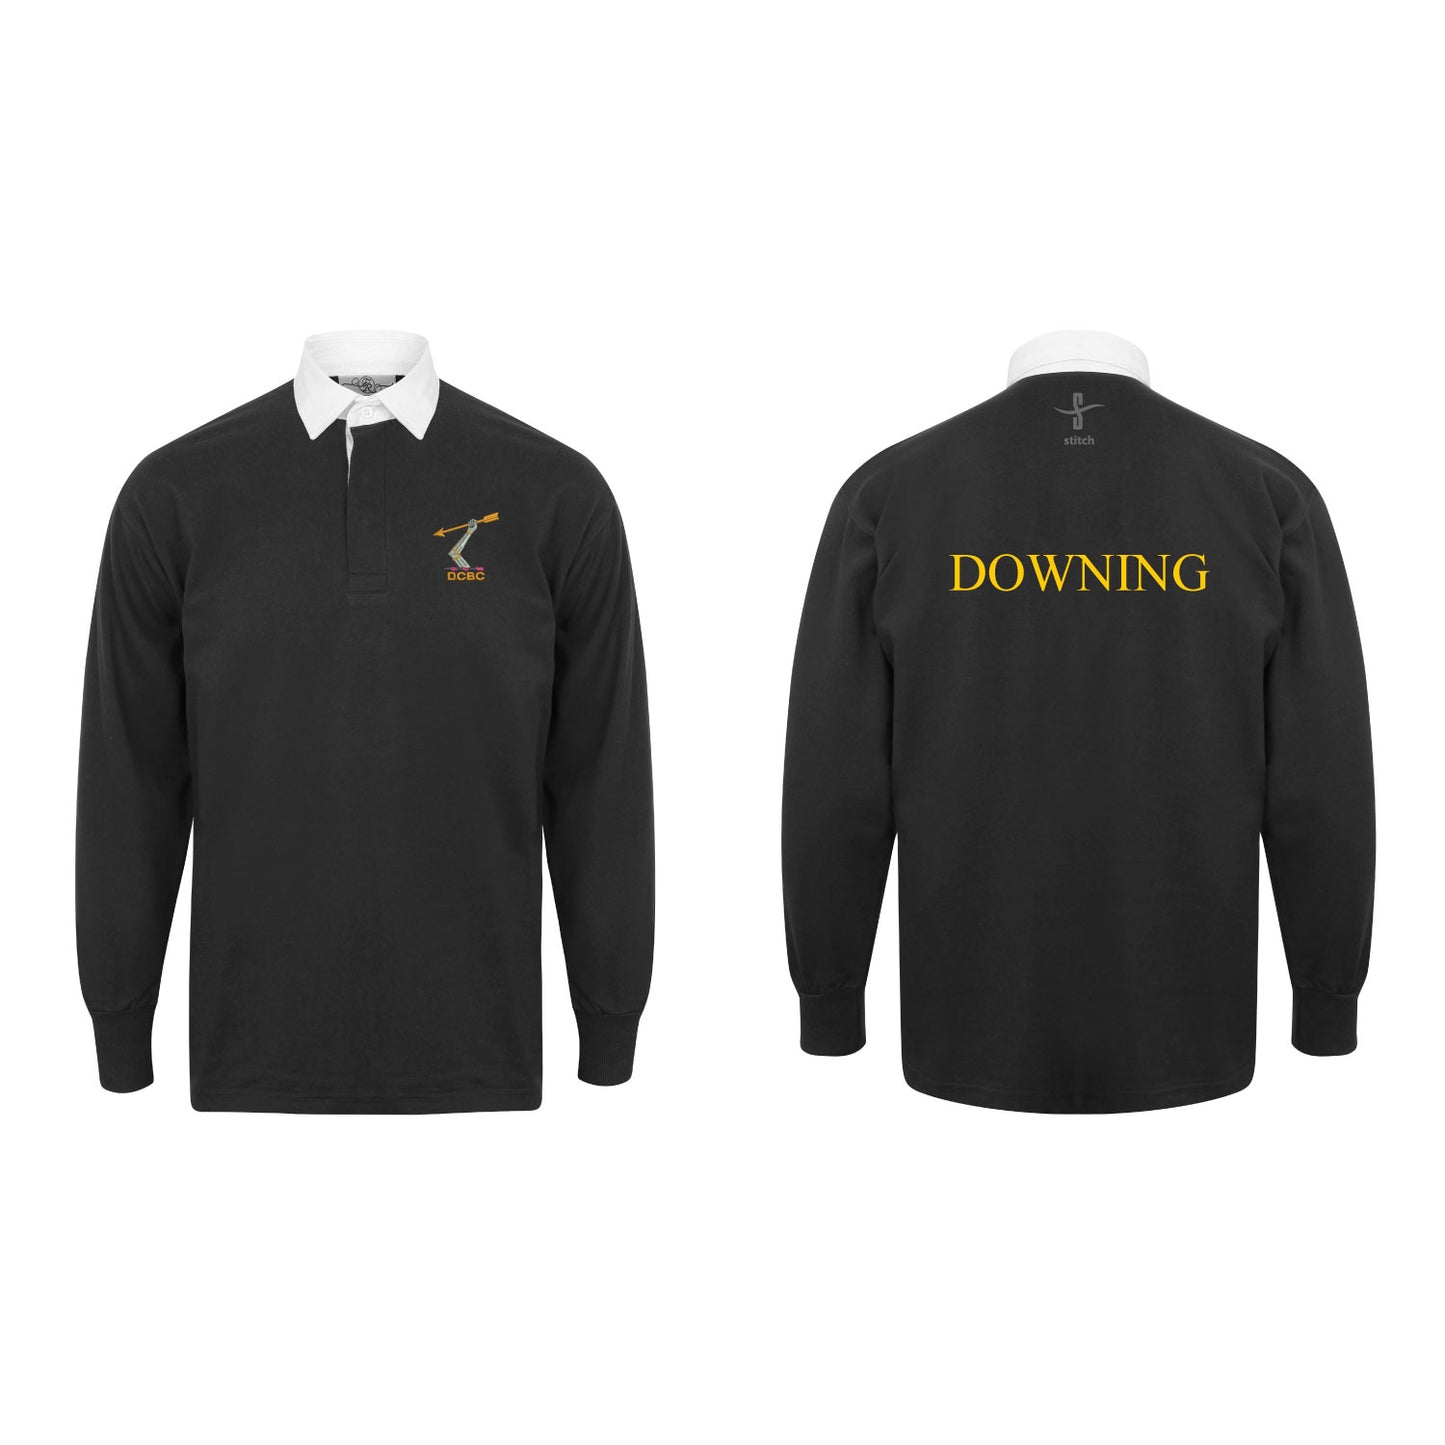 Downing College Leisure Rugby Shirt